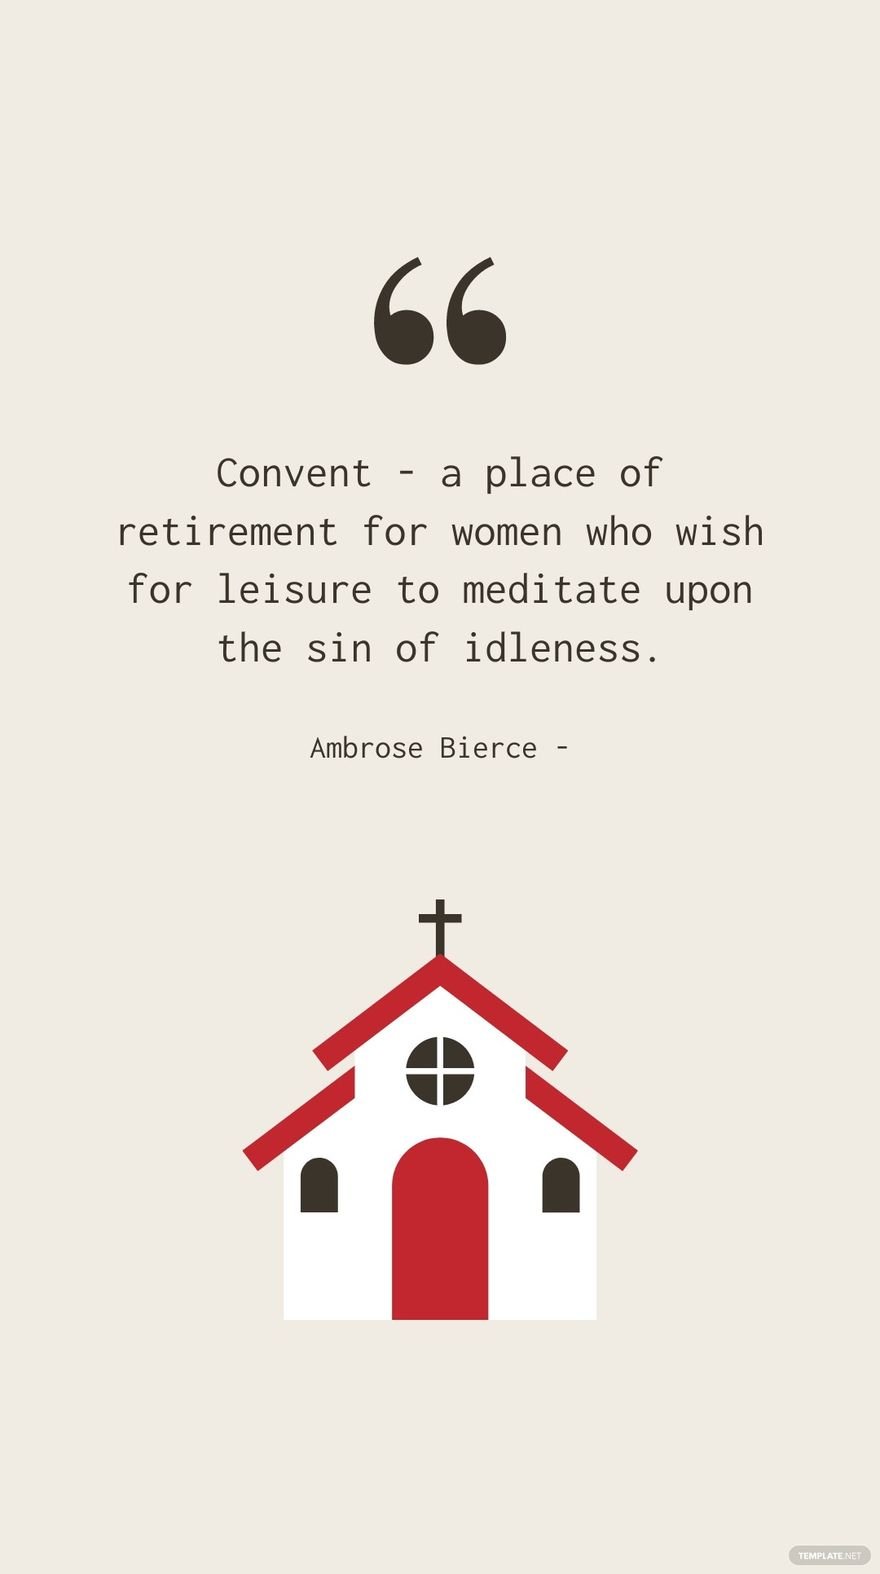 Ambrose Bierce - Convent - a place of retirement for women who wish for leisure to meditate upon the sin of idleness.